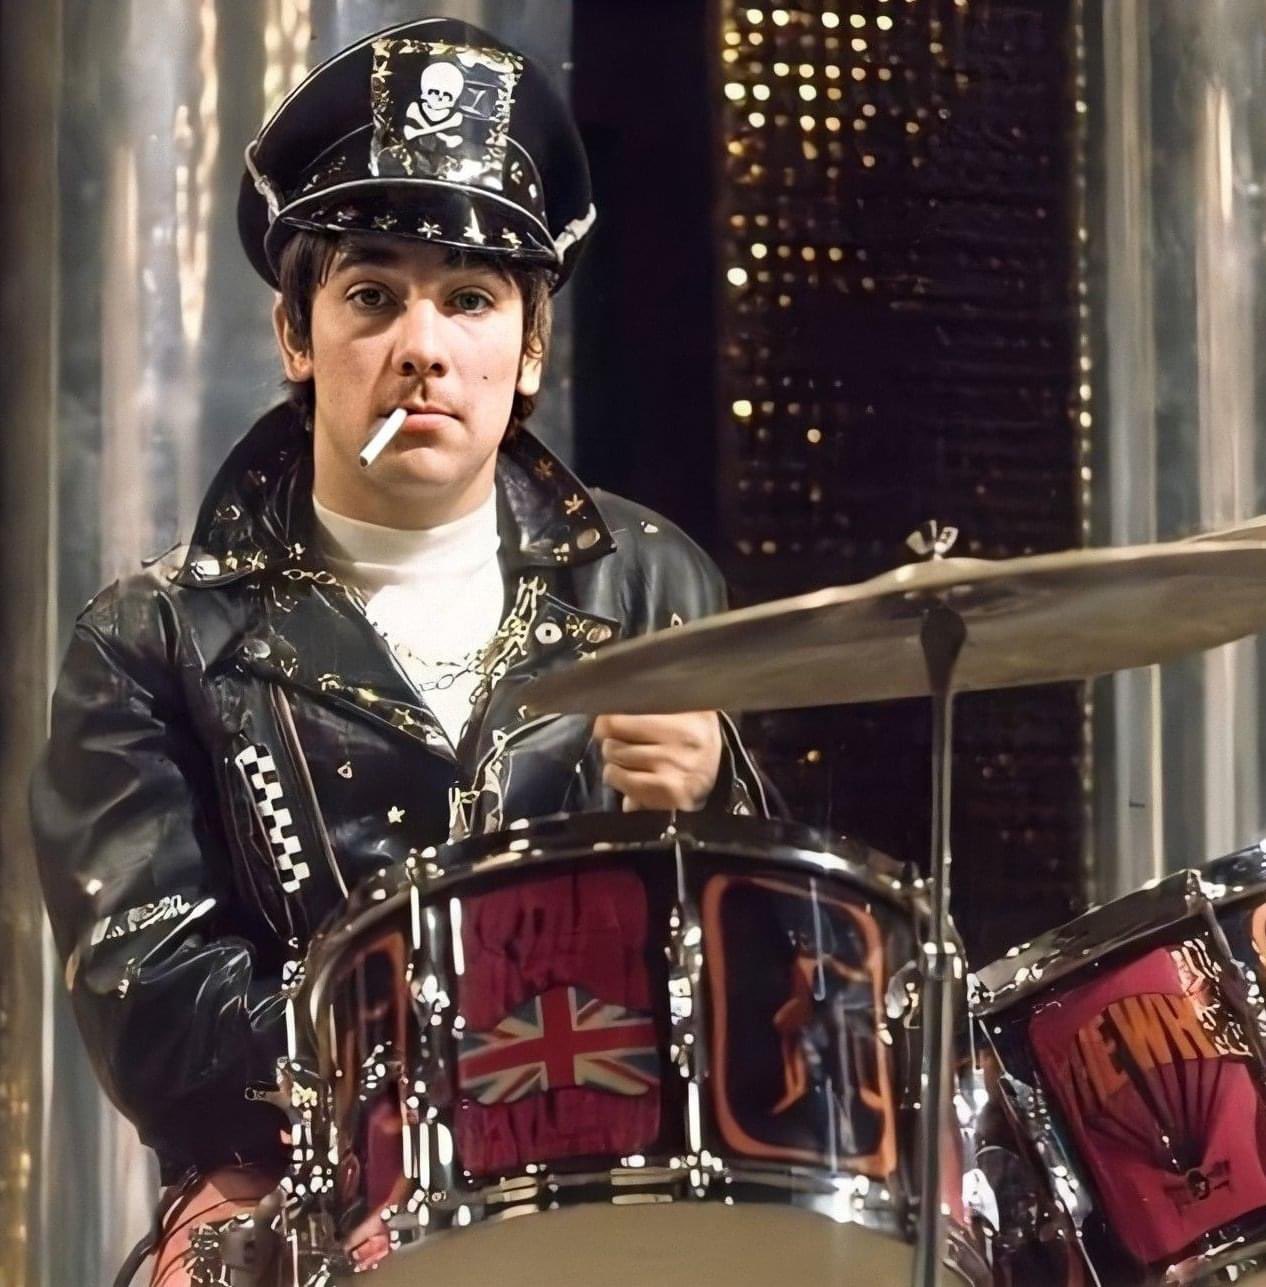 Happy Birthday to co-founder of THE WHO, Keith Moon! 23 August 1946 - 7 September 1978 